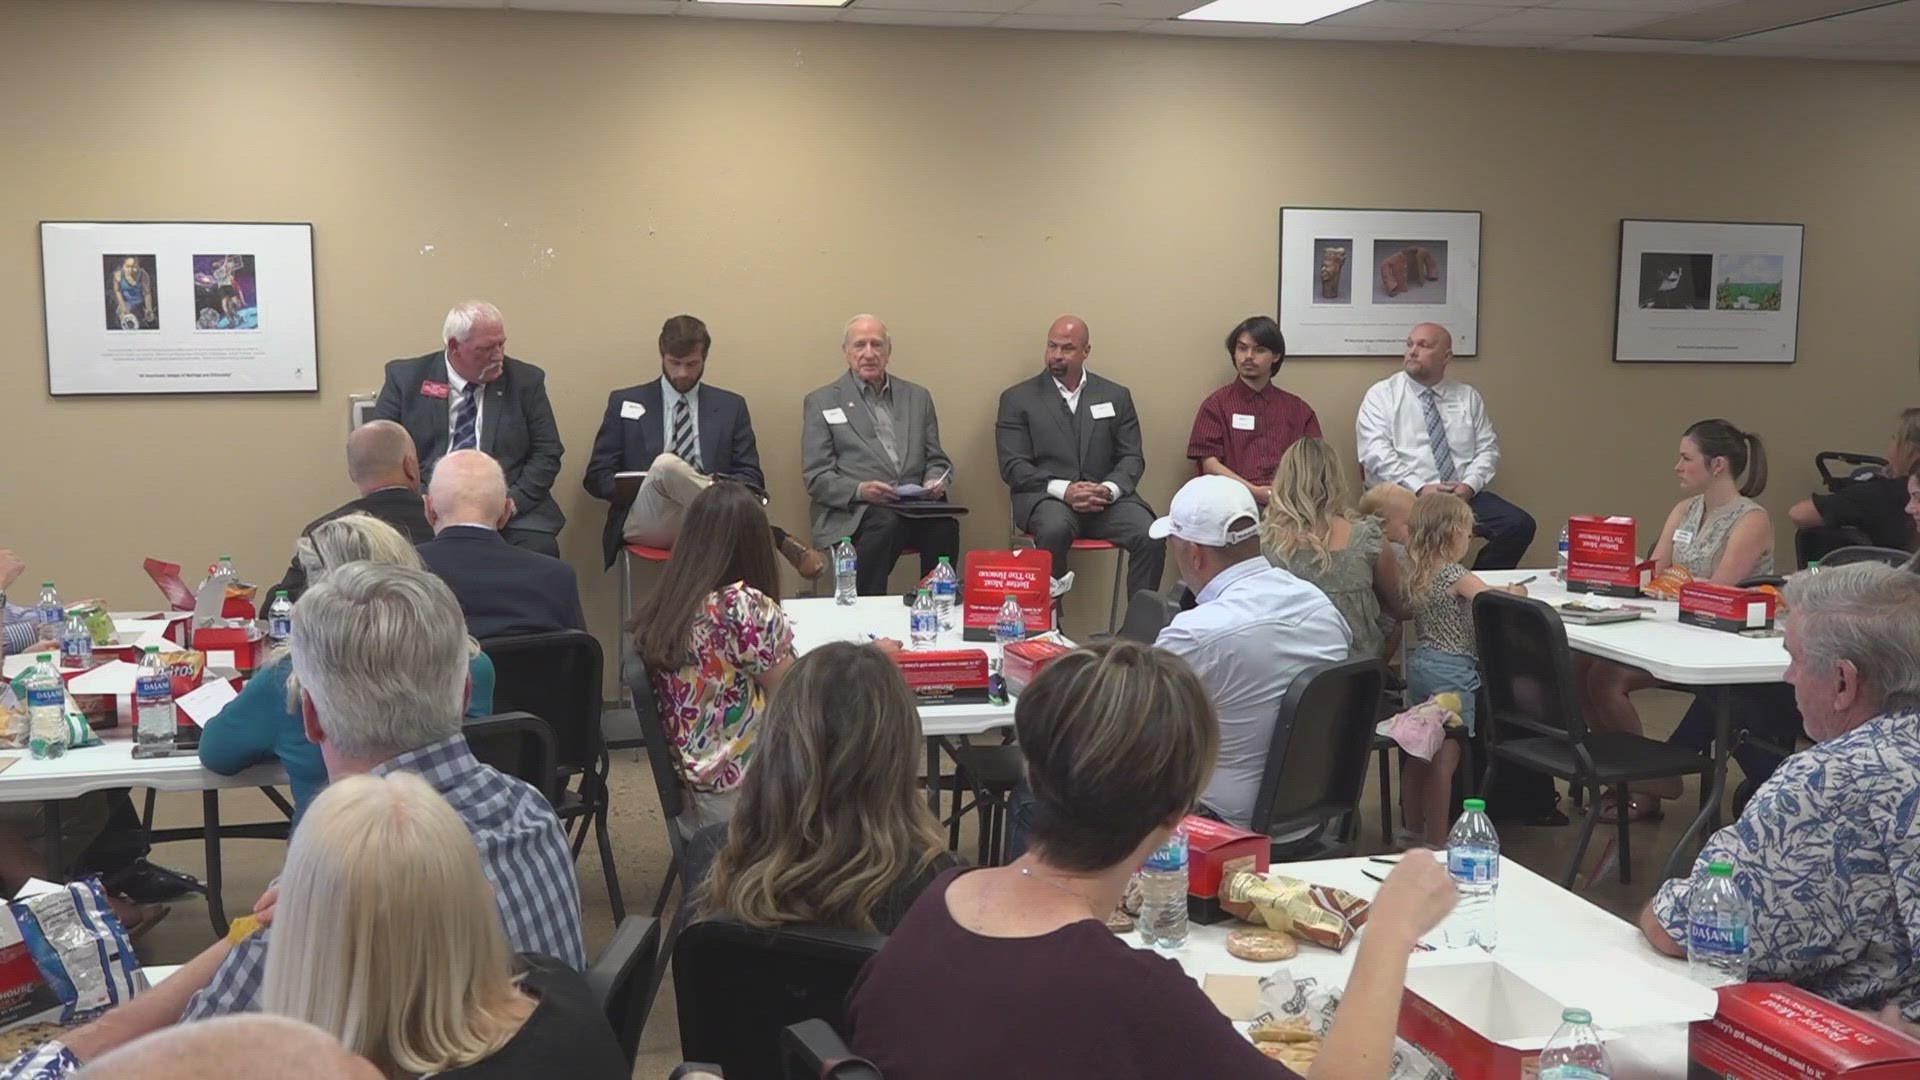 The Midland Liberty Leadership Council hosted the forum. All five candidates spoke on everything from why they are running to challenges Midland faces in the future.